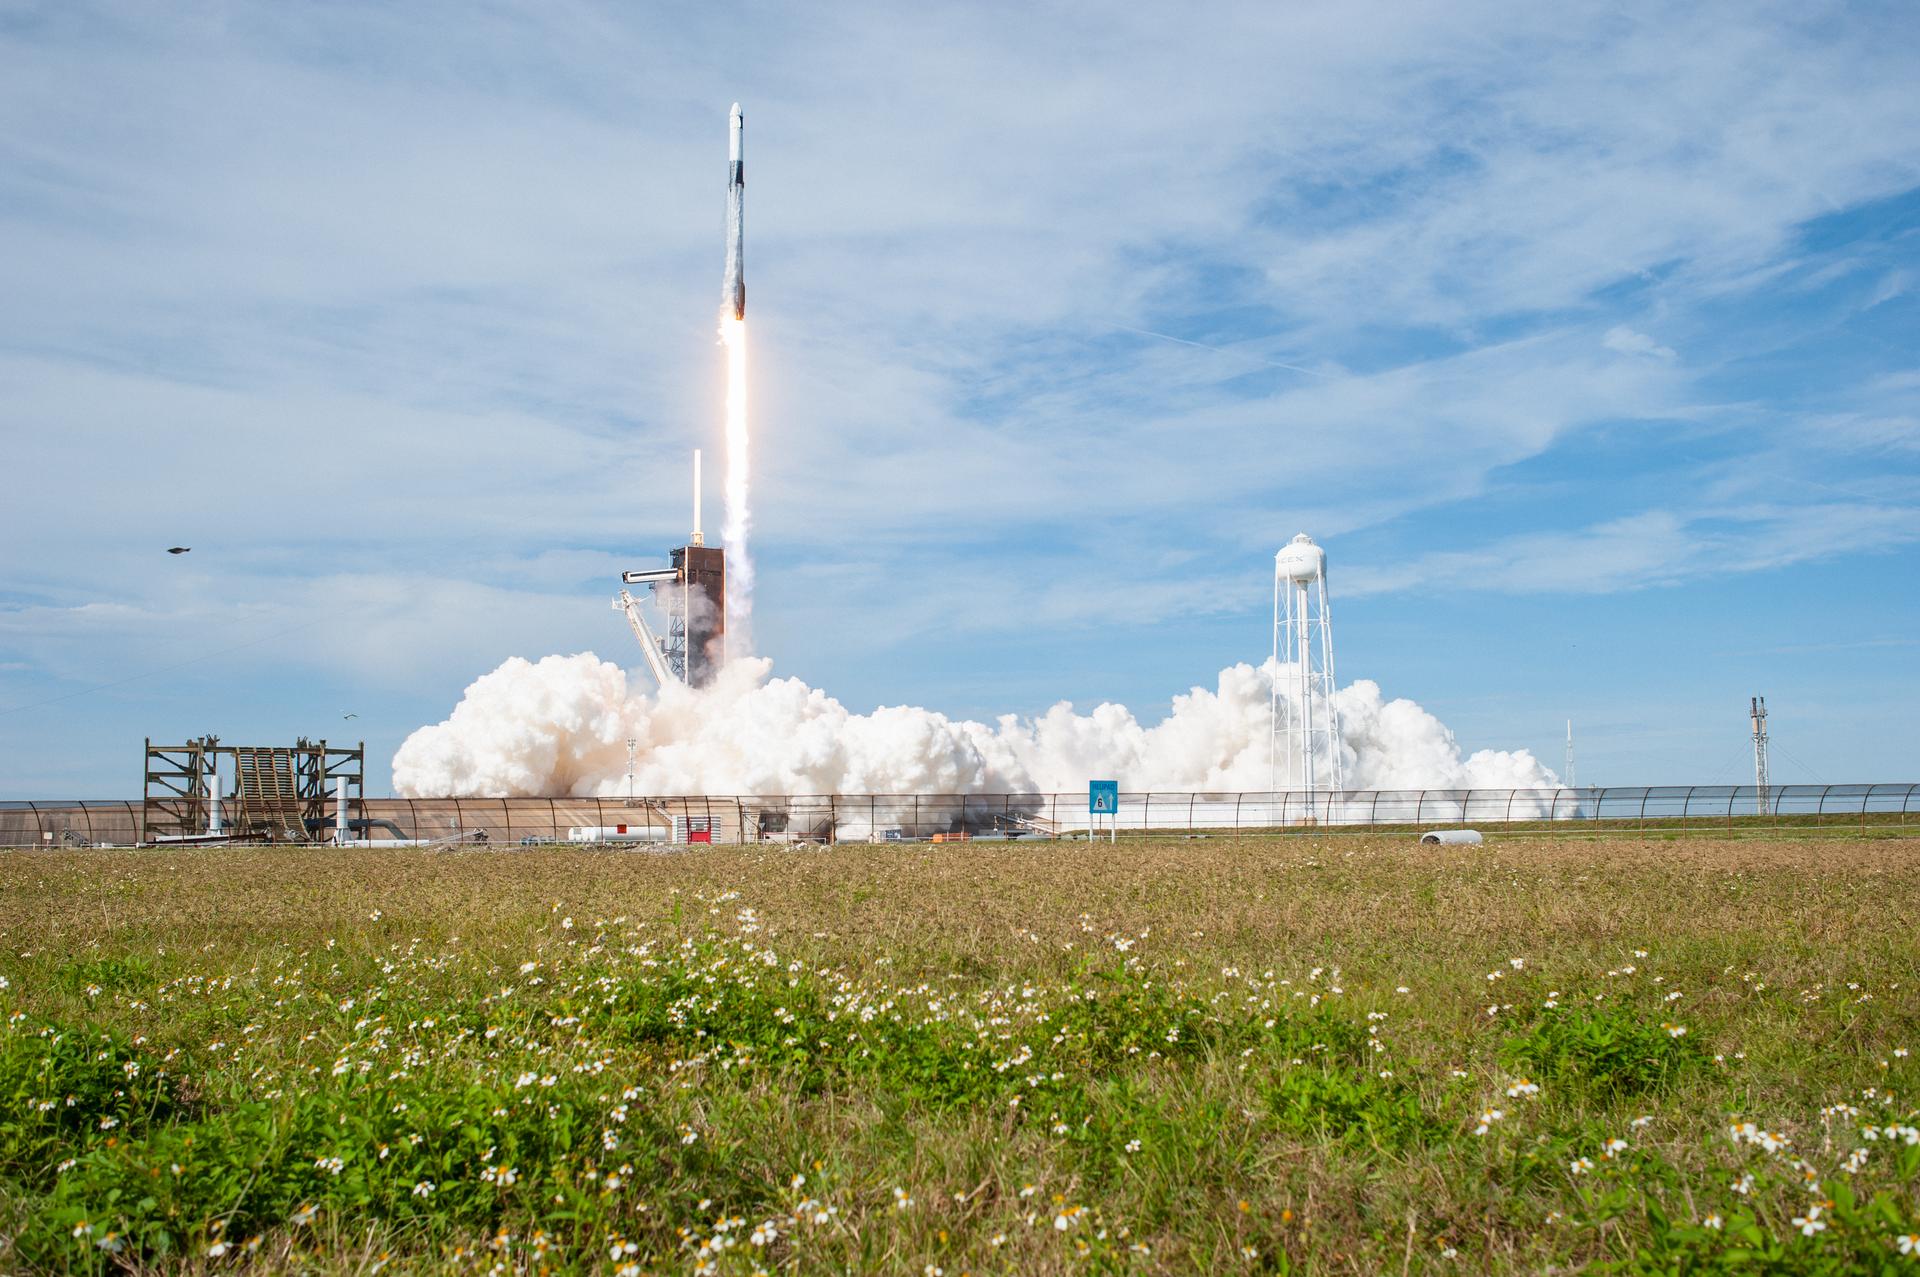 A SpaceX Falcon 9 rocket lifts off from Launch Complex 39A at Kennedy Space Center in Florida at 11:17 a.m. EST on Dec. 6, 2020